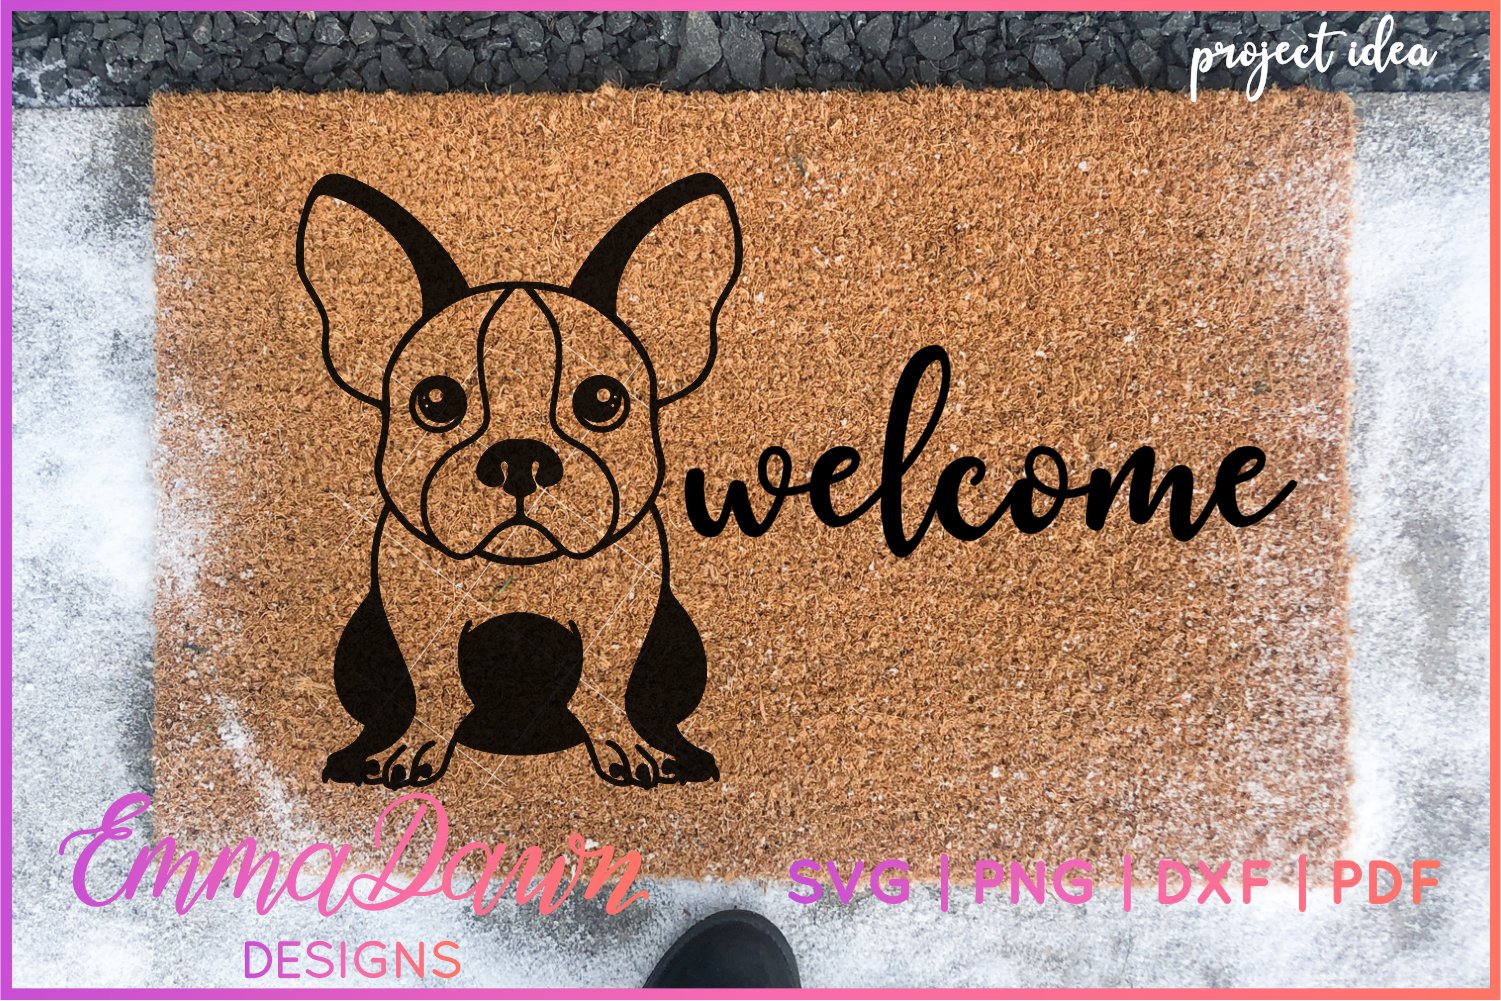 Welcome mat with a dog on it.